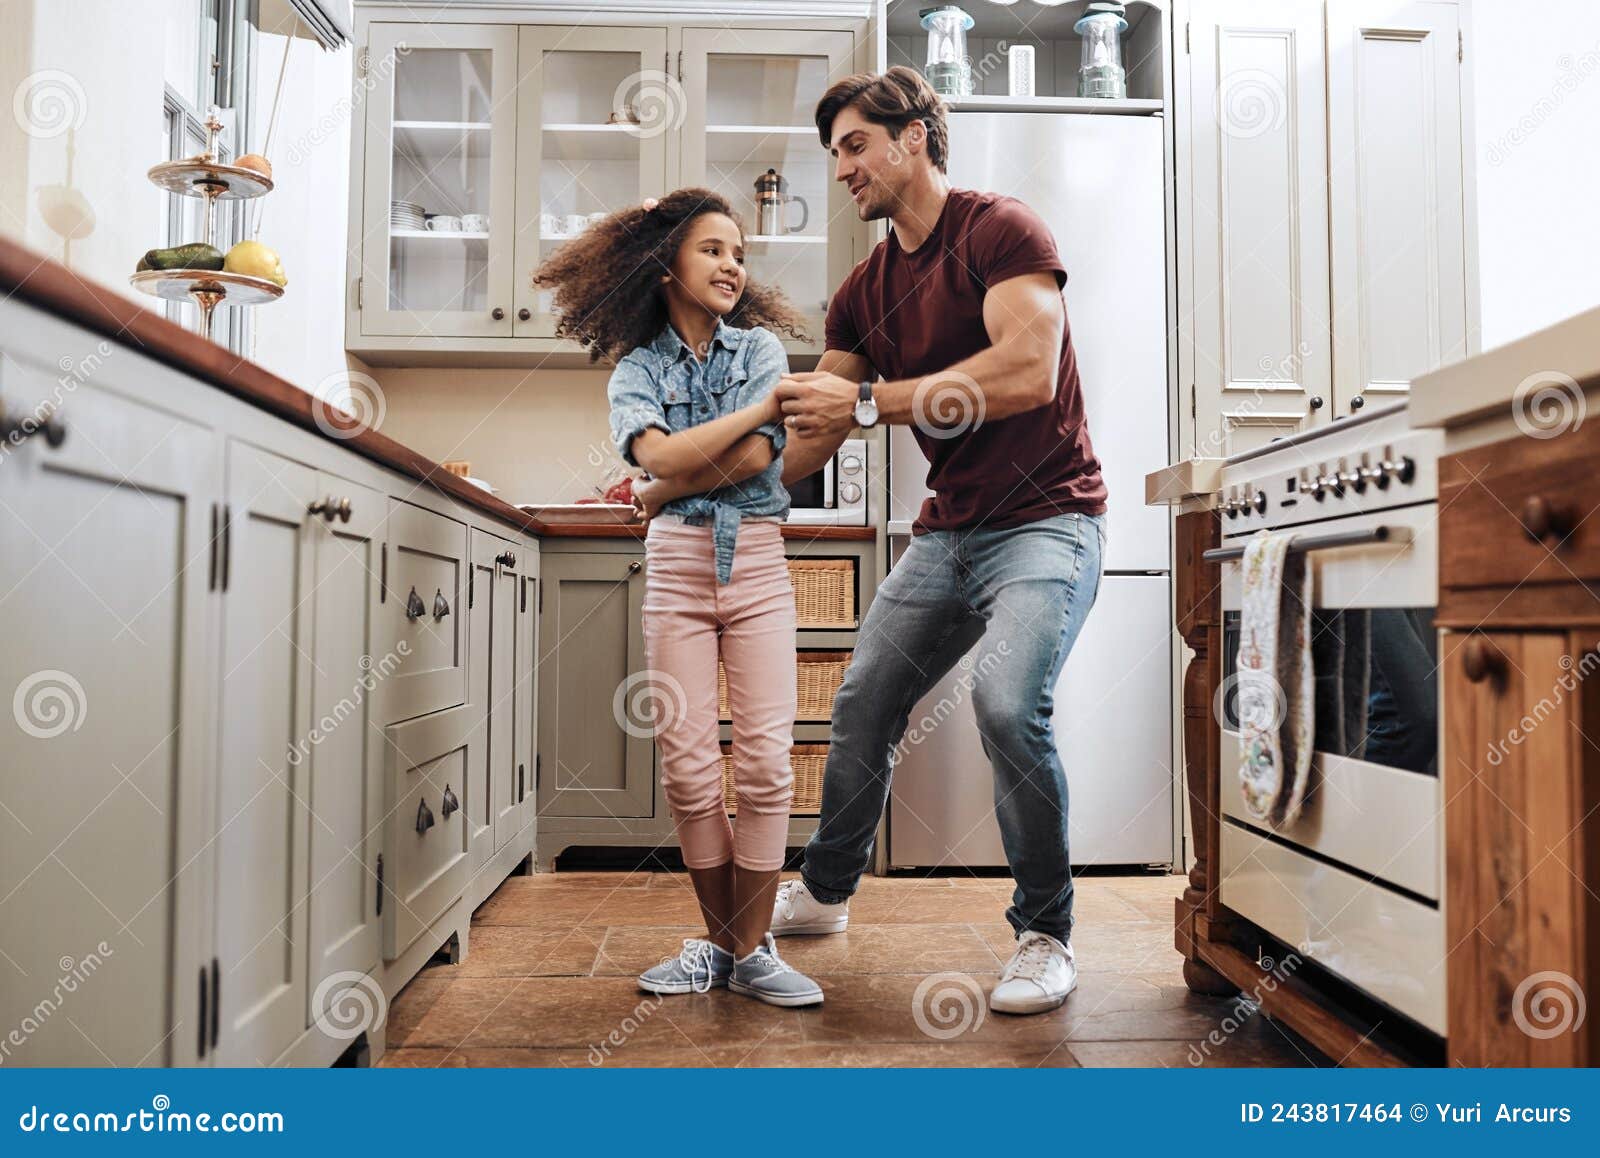 https://thumbs.dreamstime.com/z/shot-men-his-young-daughter-dancing-kitchen-home-dad-sure-knows-how-to-make-me-feel-like-princess-shot-243817464.jpg